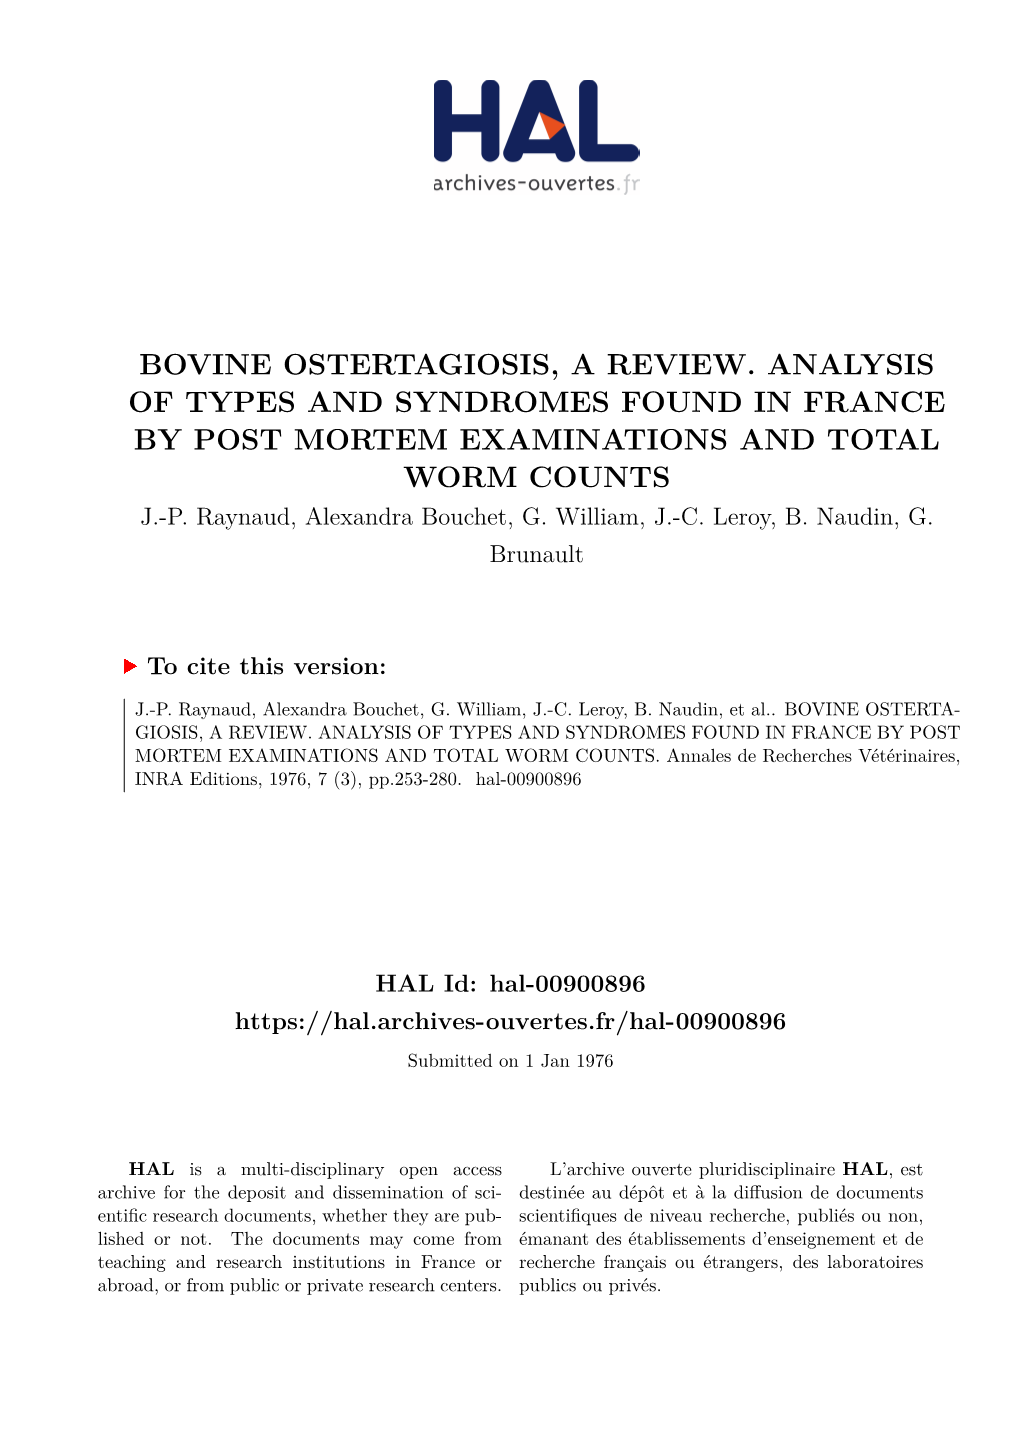 Bovine Ostertagiosis, a Review. Analysis of Types and Syndromes Found in France by Post Mortem Examinations and Total Worm Counts J.-P